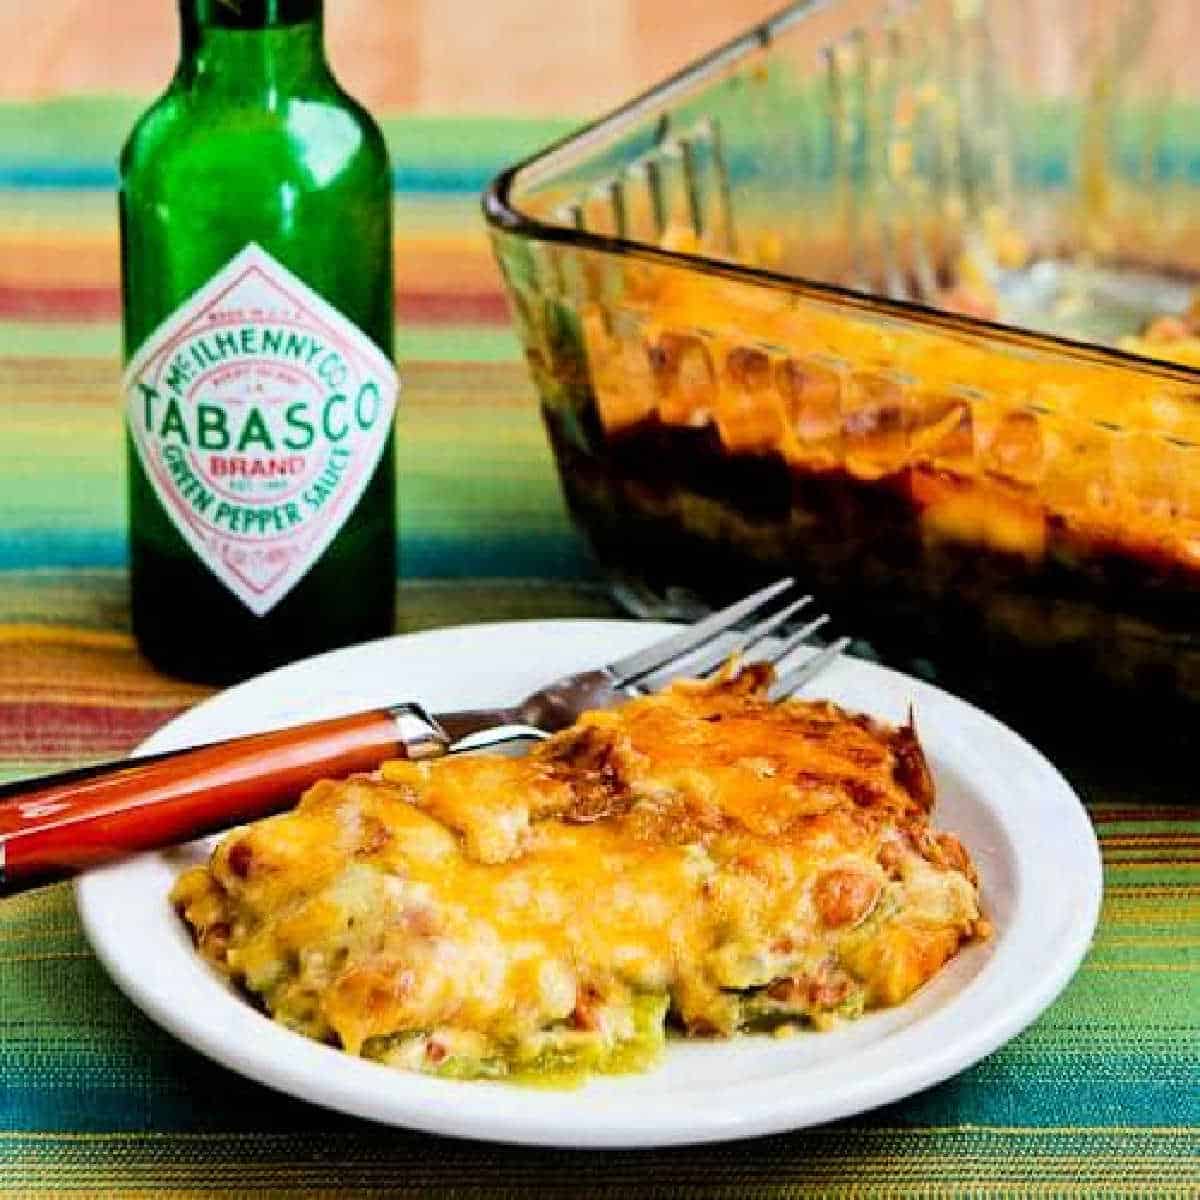 A square image of a vegetarian mexican casserole is displayed on a plate and the casserole is behind a baking dish.